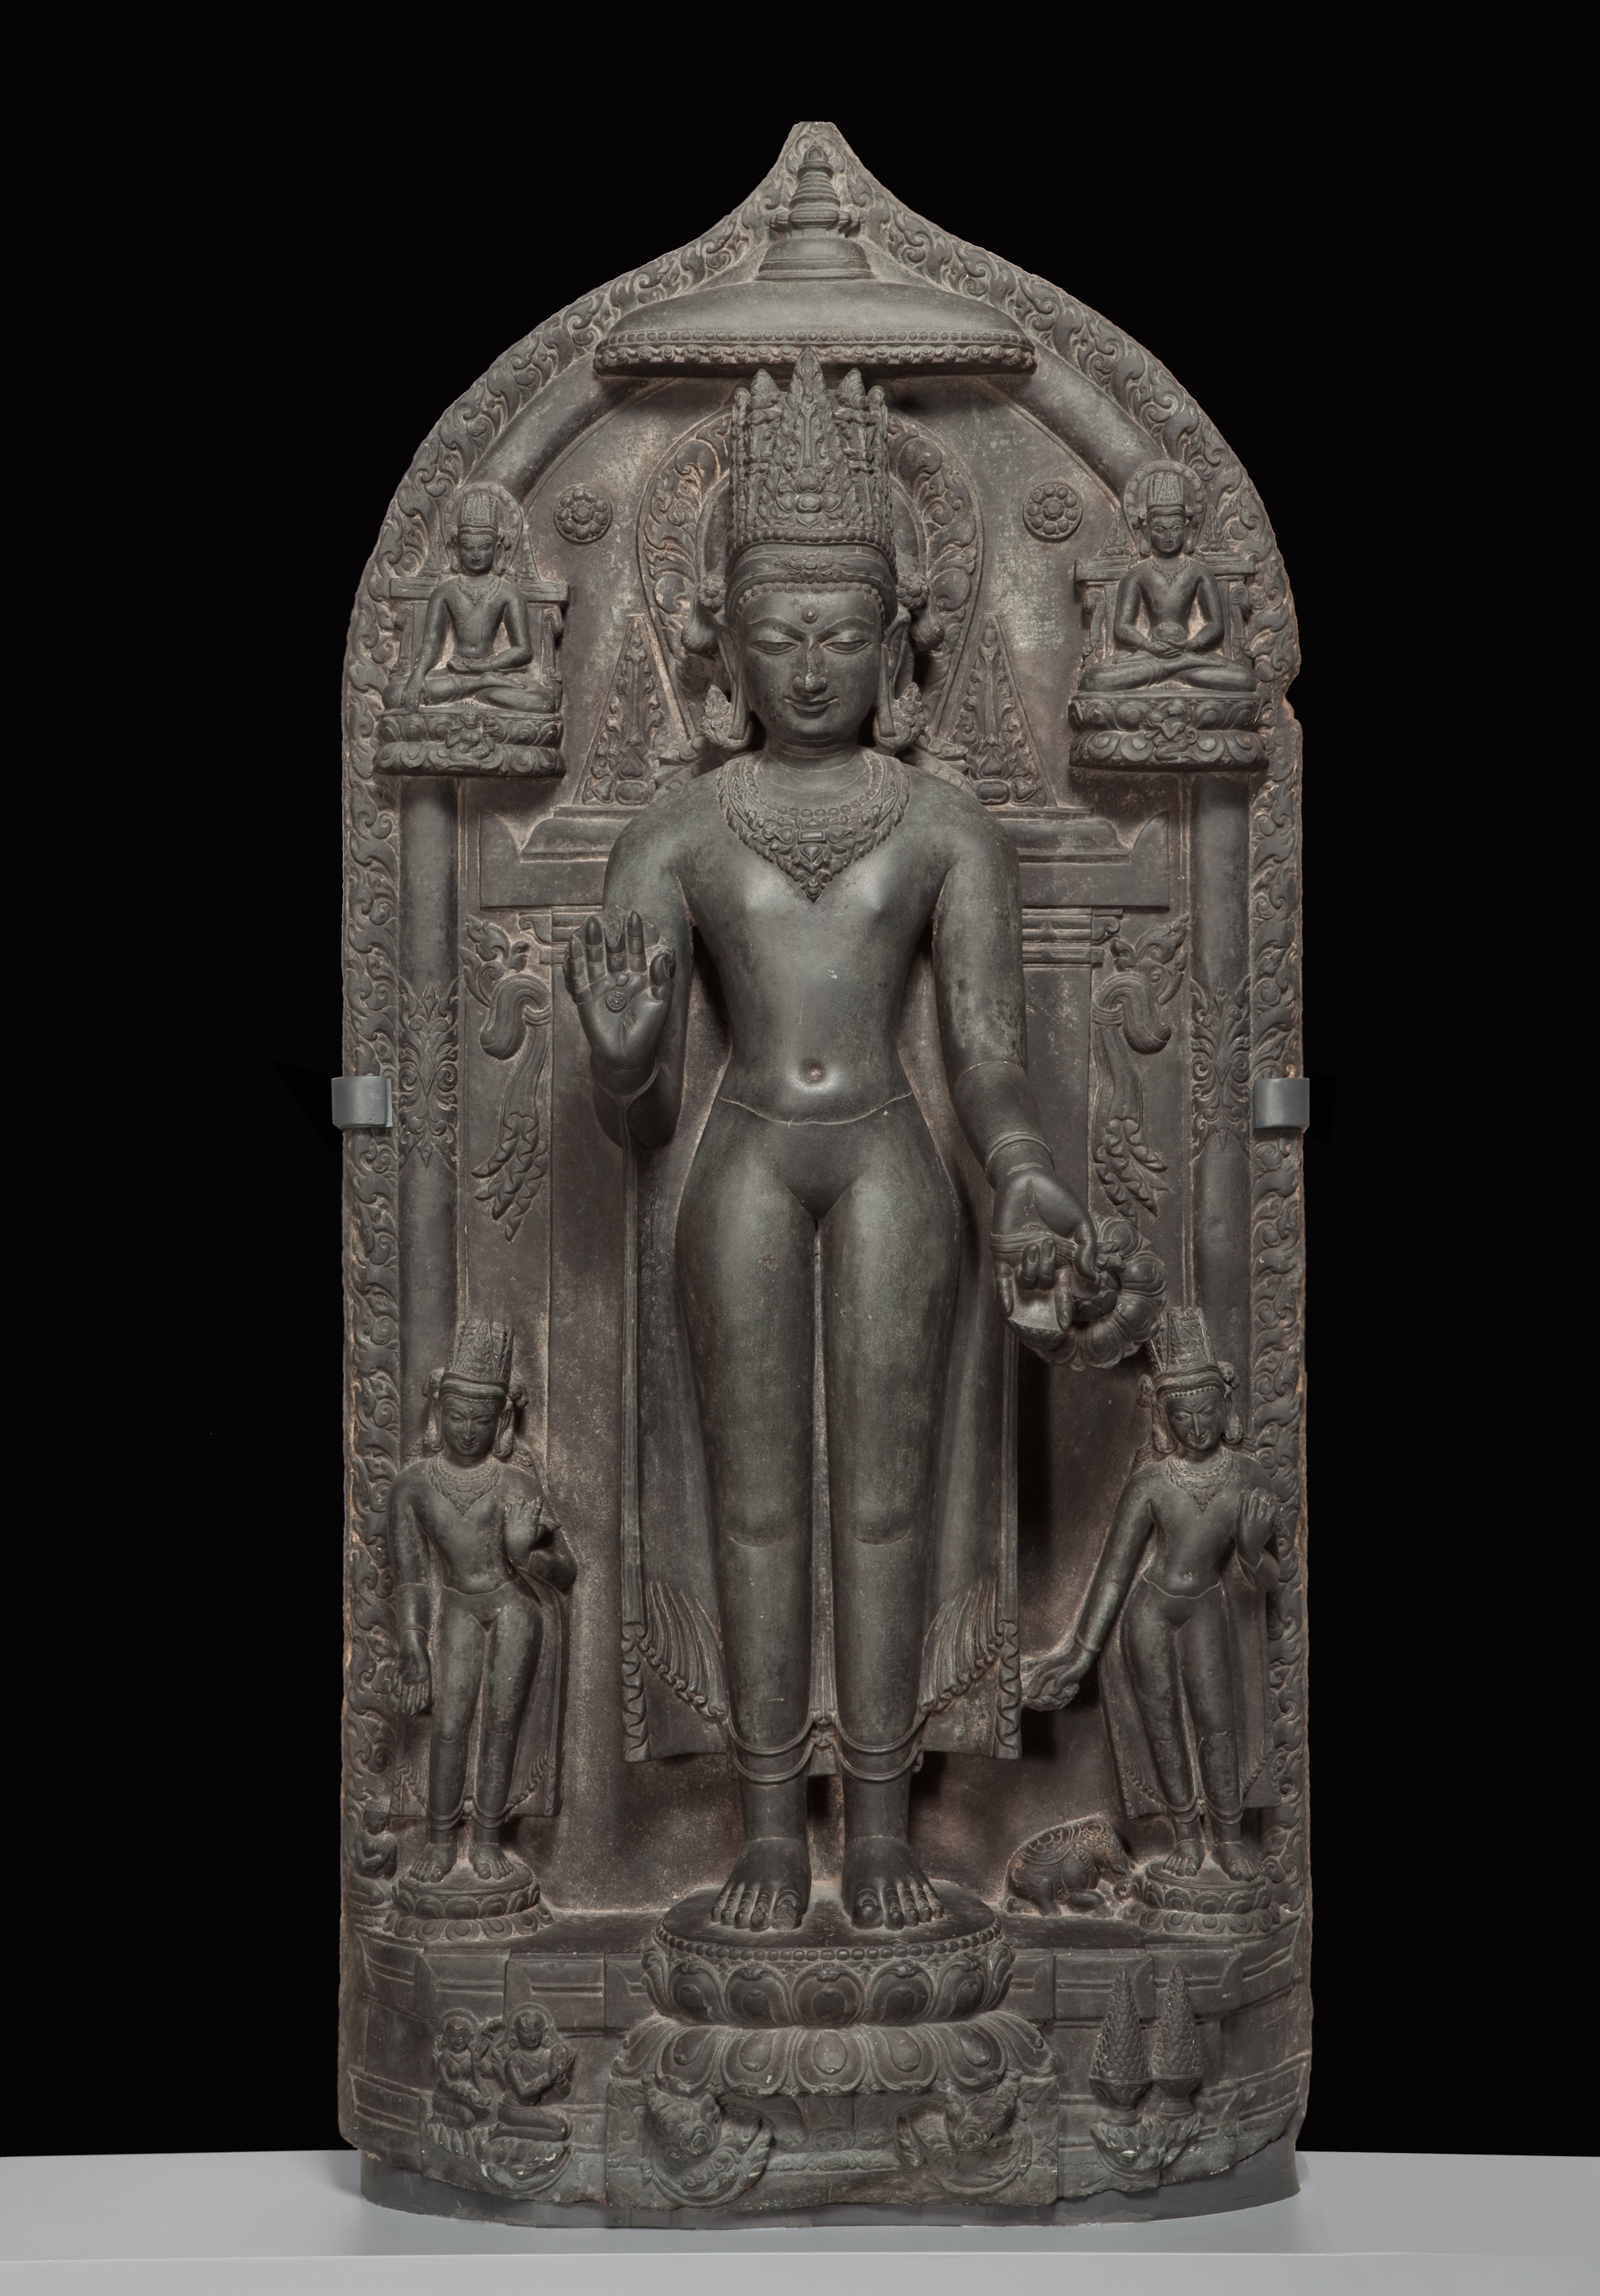 Buddhist art: These ancient images are more timely than you think